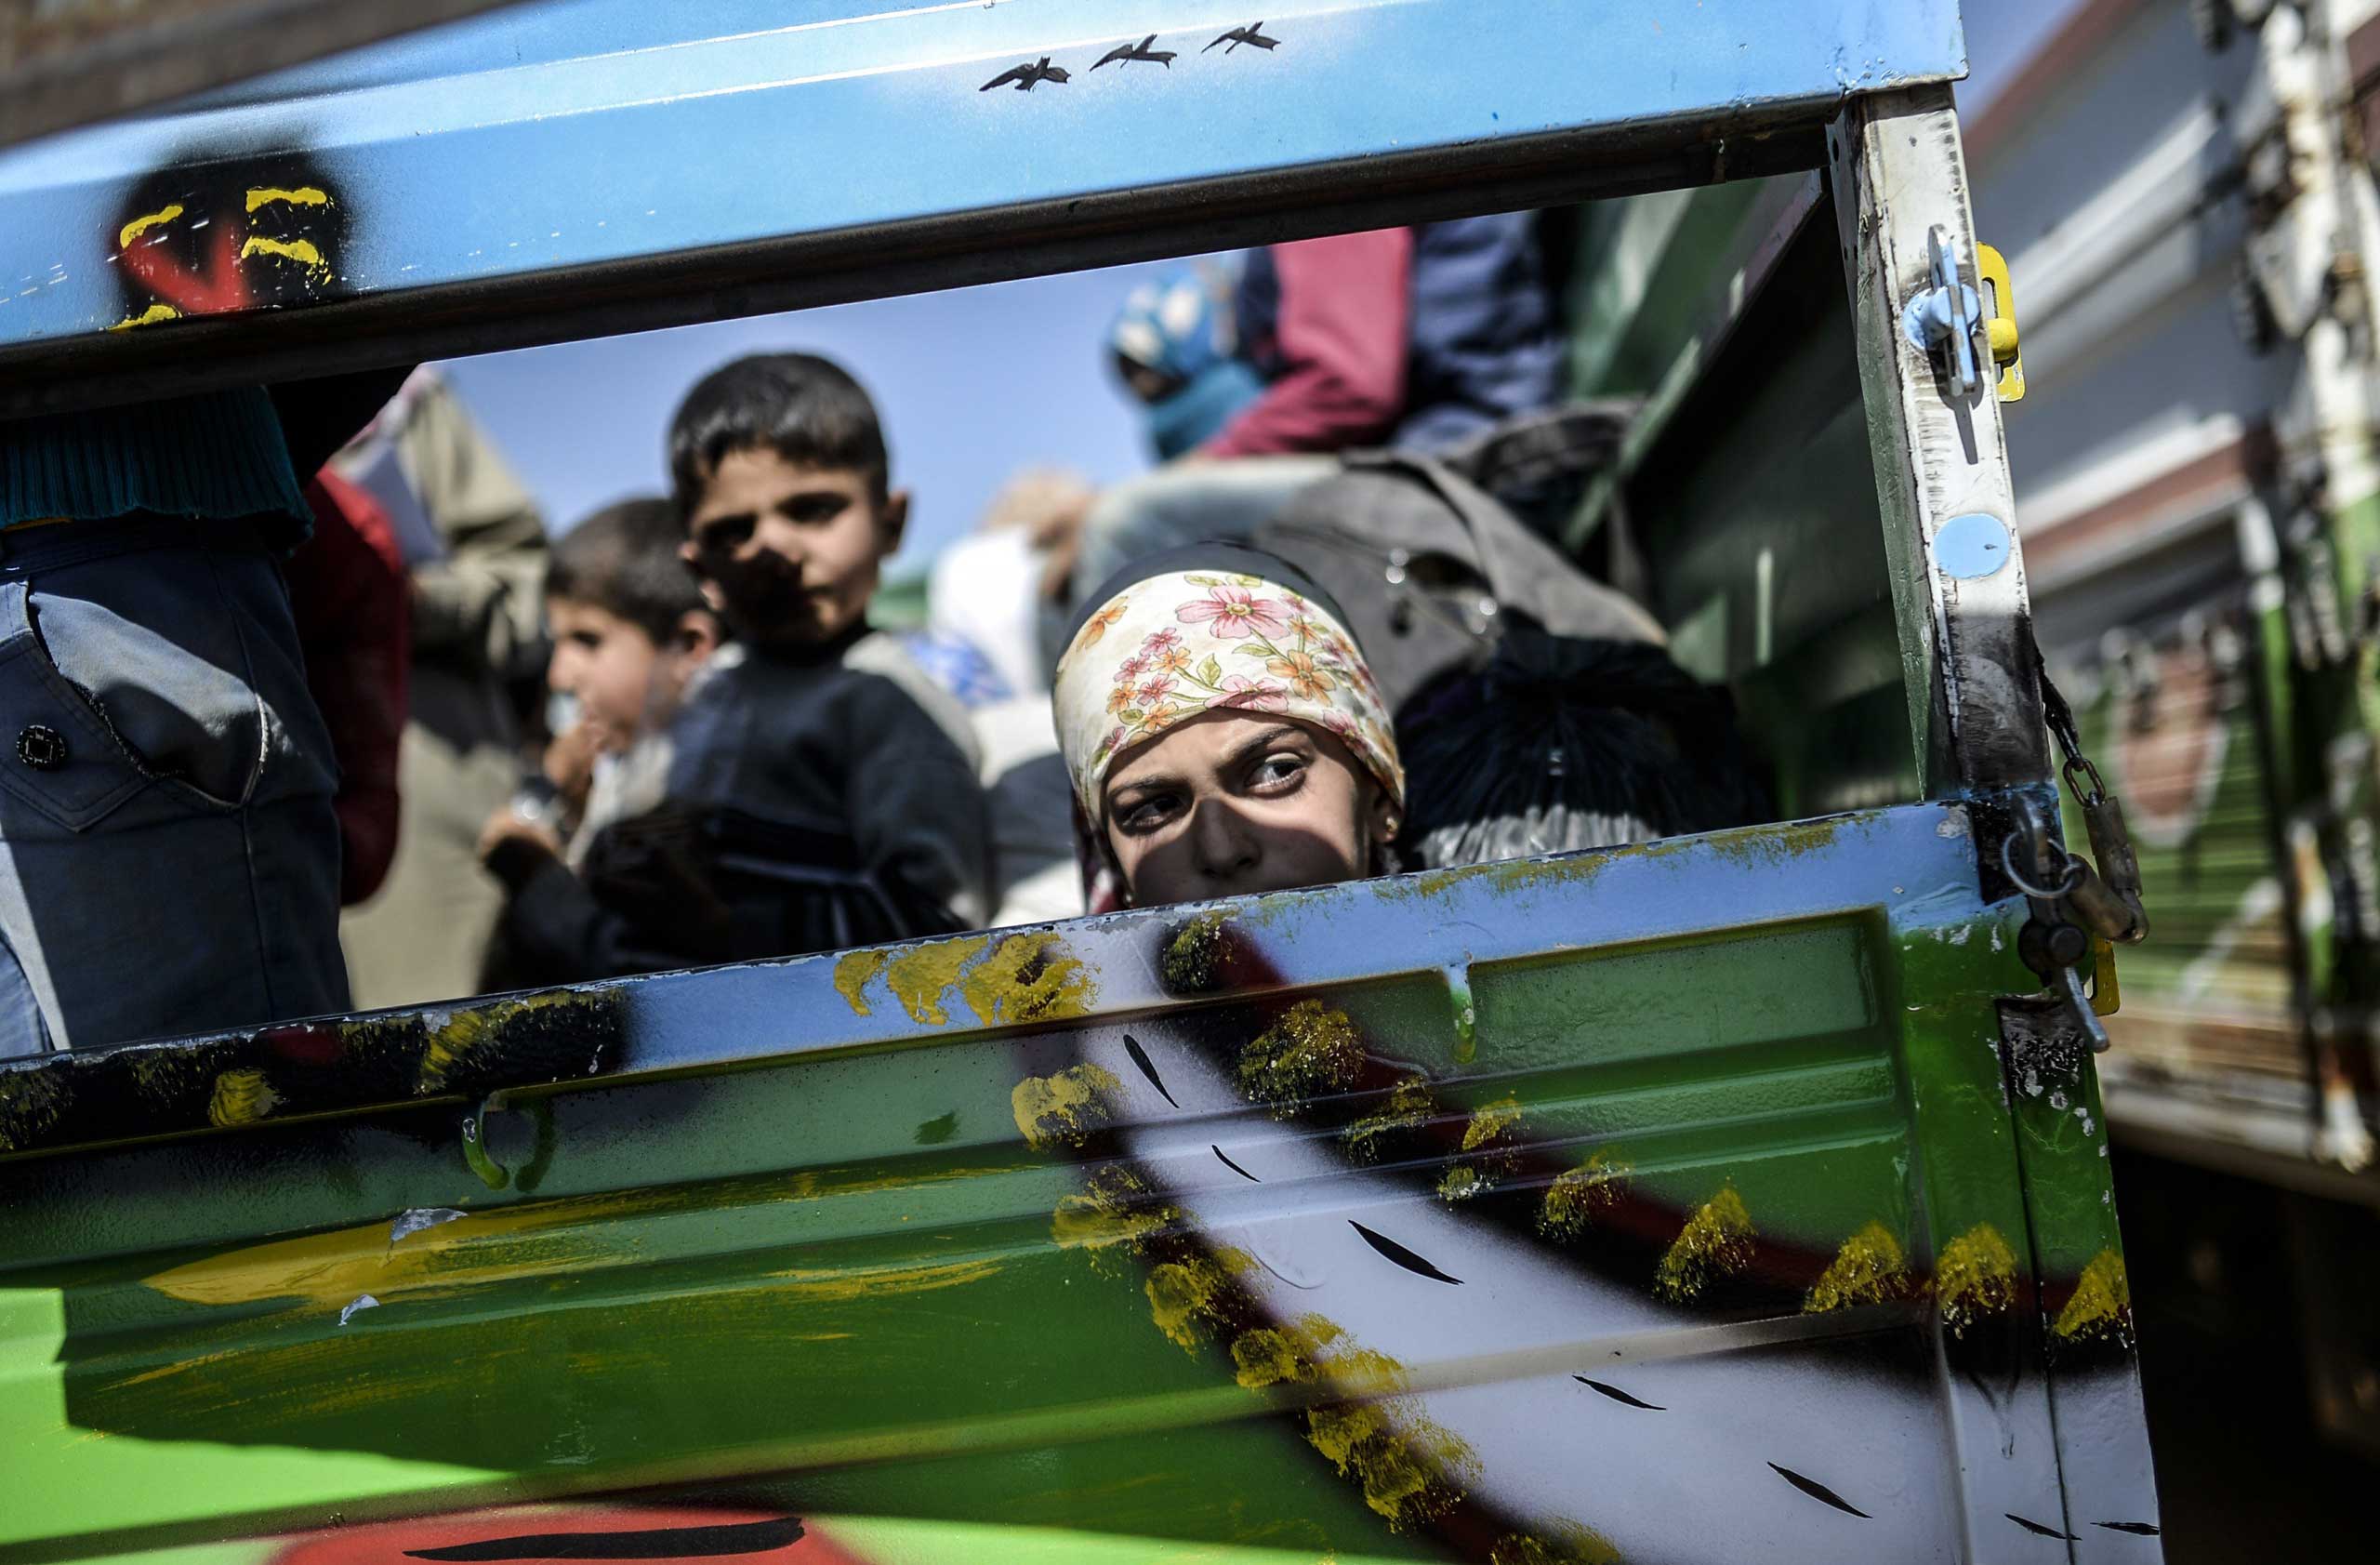 Sept. 23, 2014. Syrian Kurds sit in a truck after crossing the Syrian-Turkish border at the southeastern town of Suruc in Sanliurfa province.